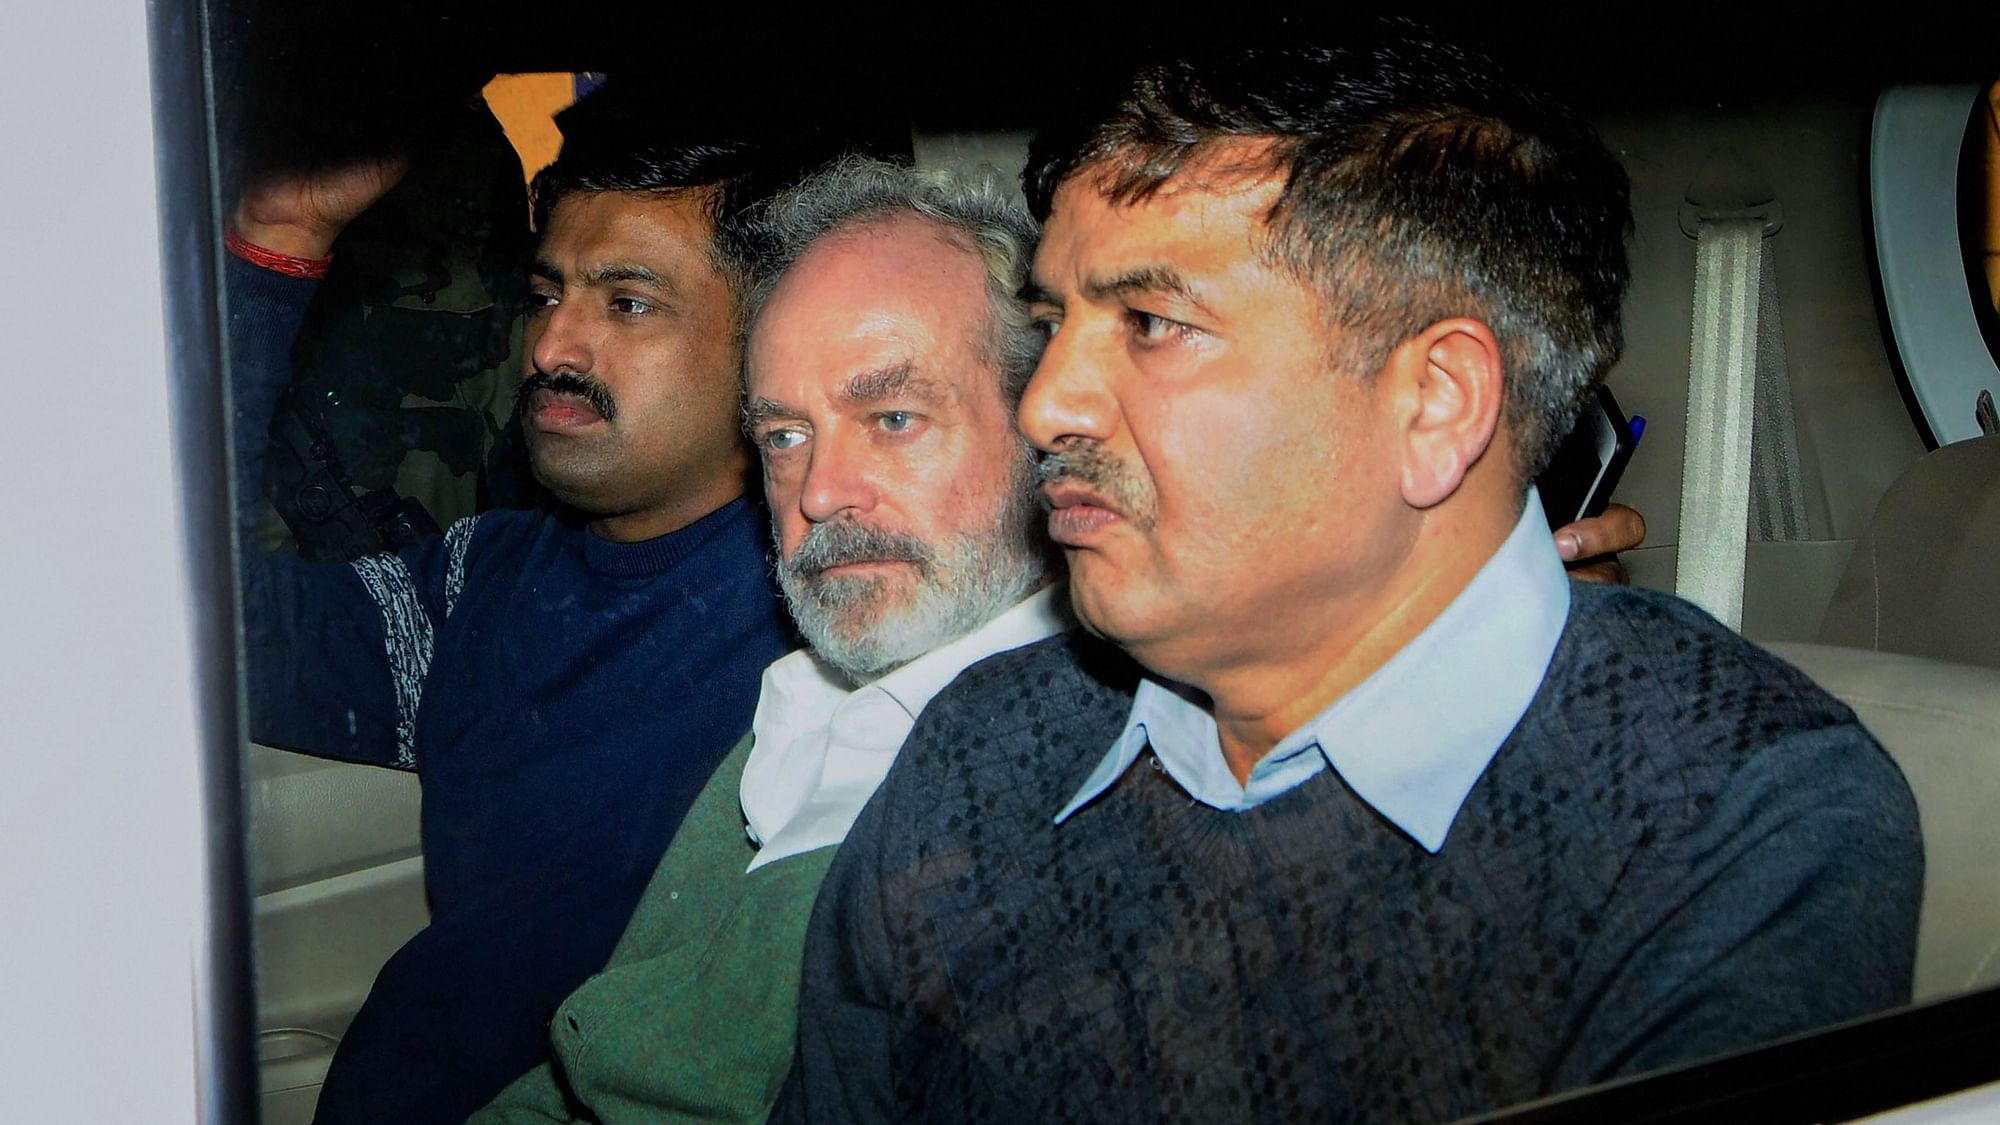 Christian Michel, accused in the AgustaWestland scam.